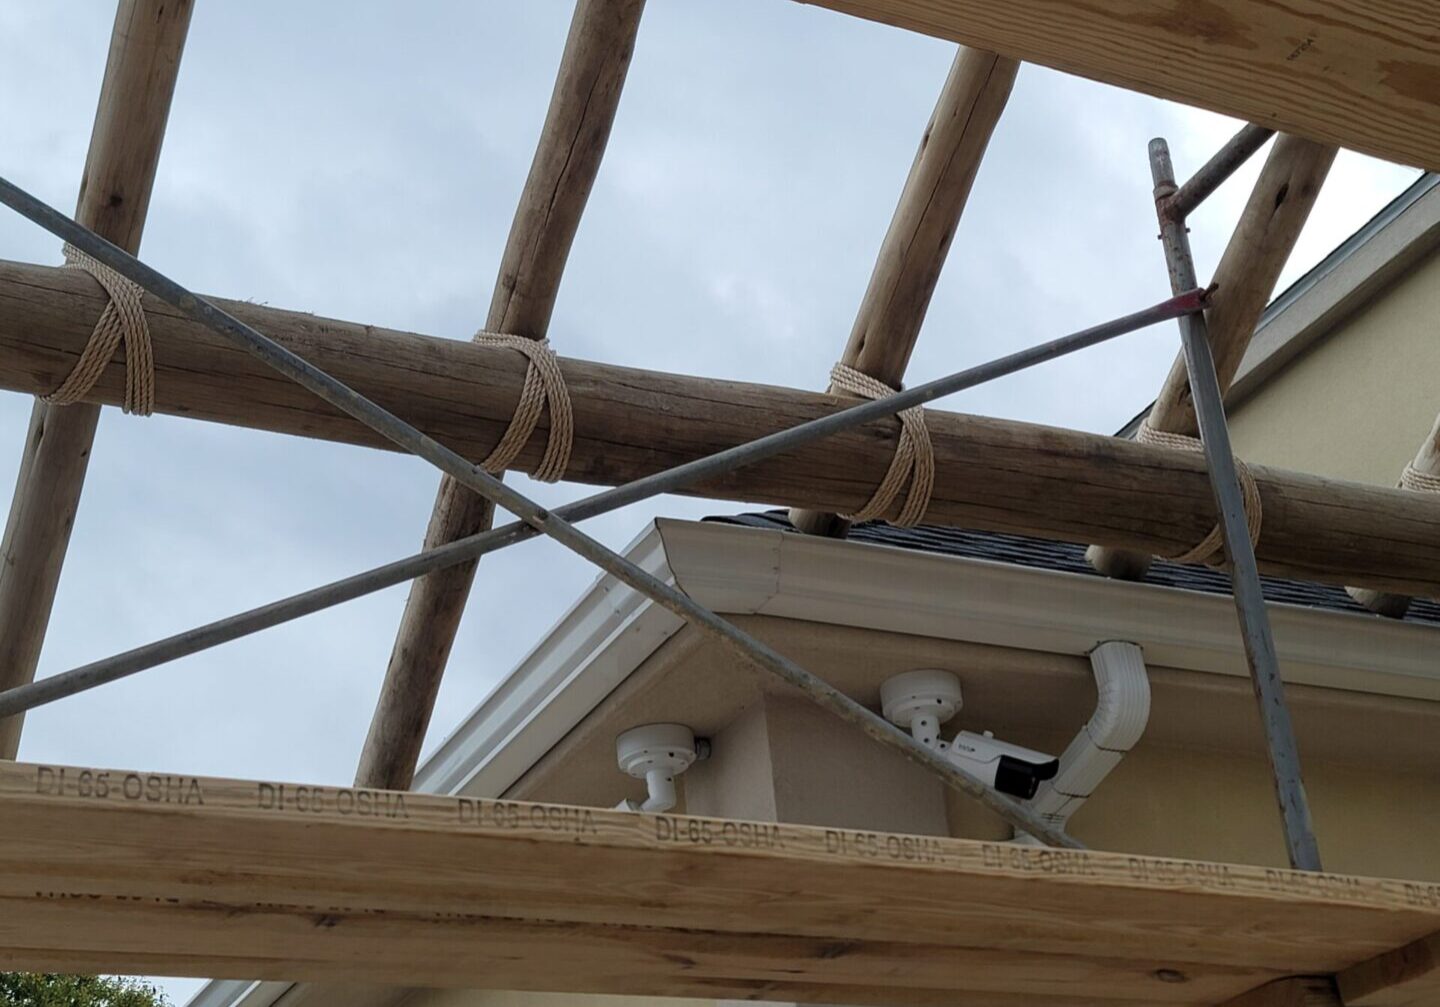 The roof of a house is being built with wooden beams.